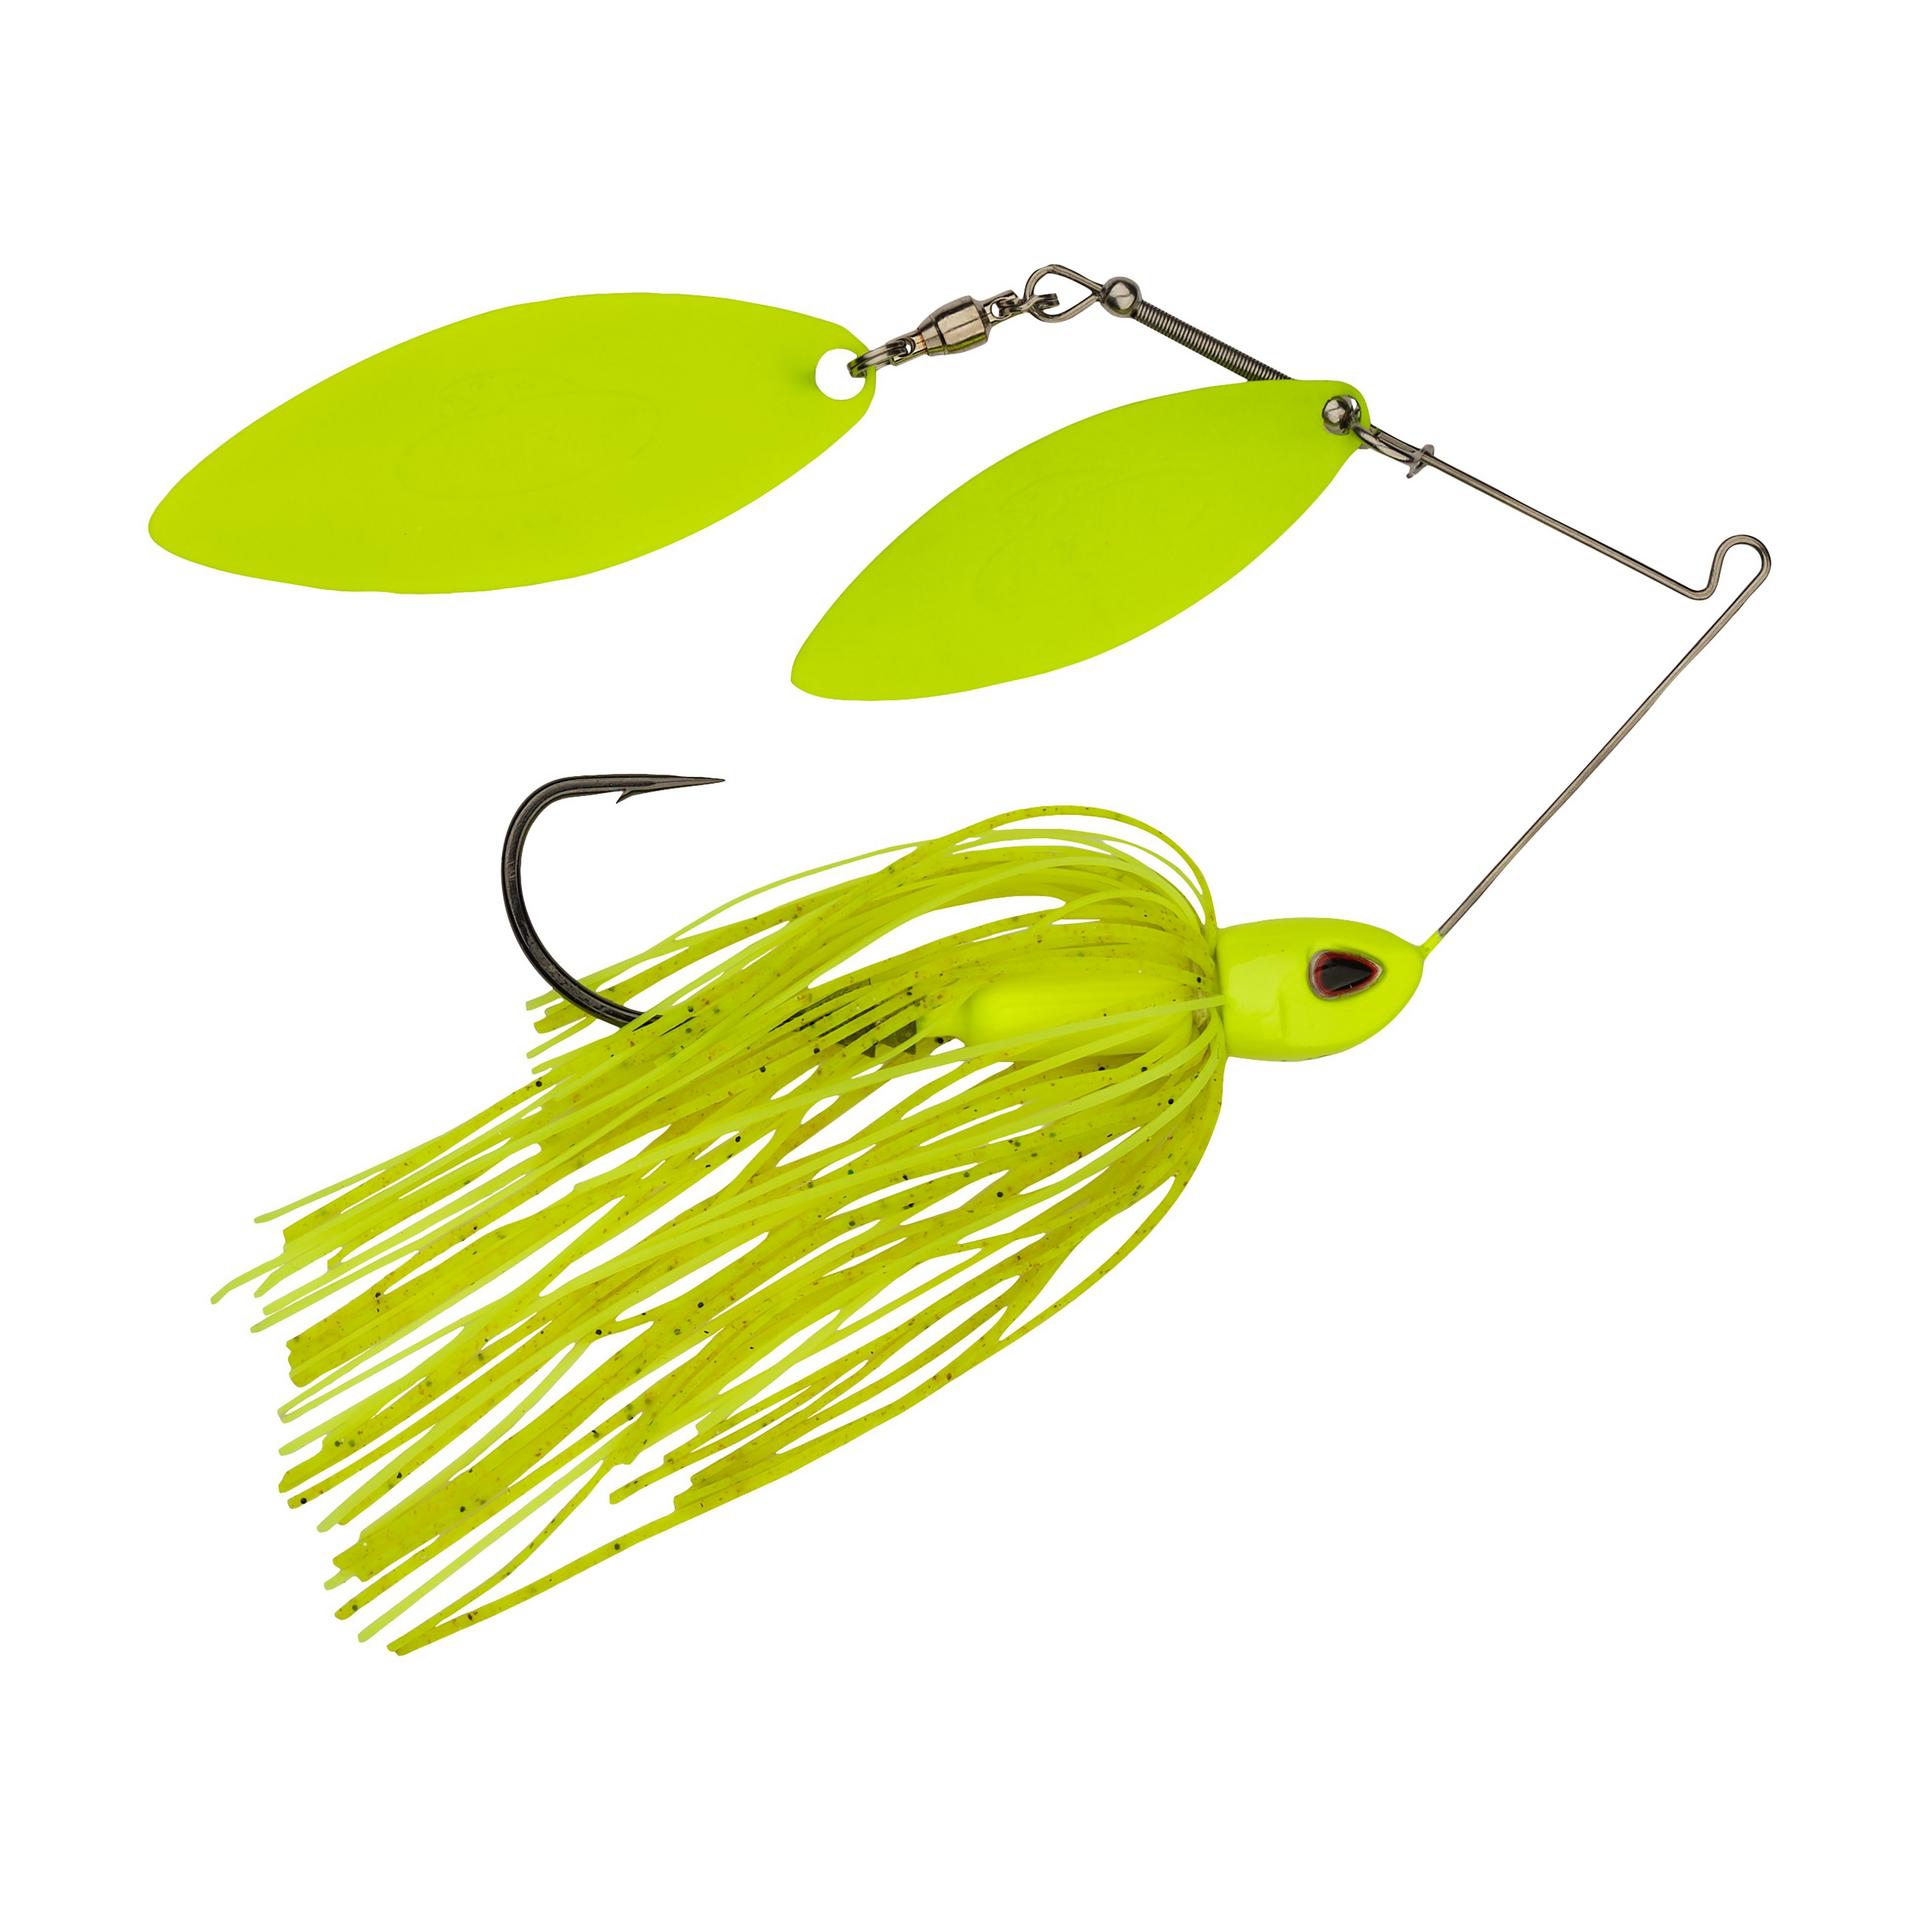 Power® Blade Compact Double-Willow